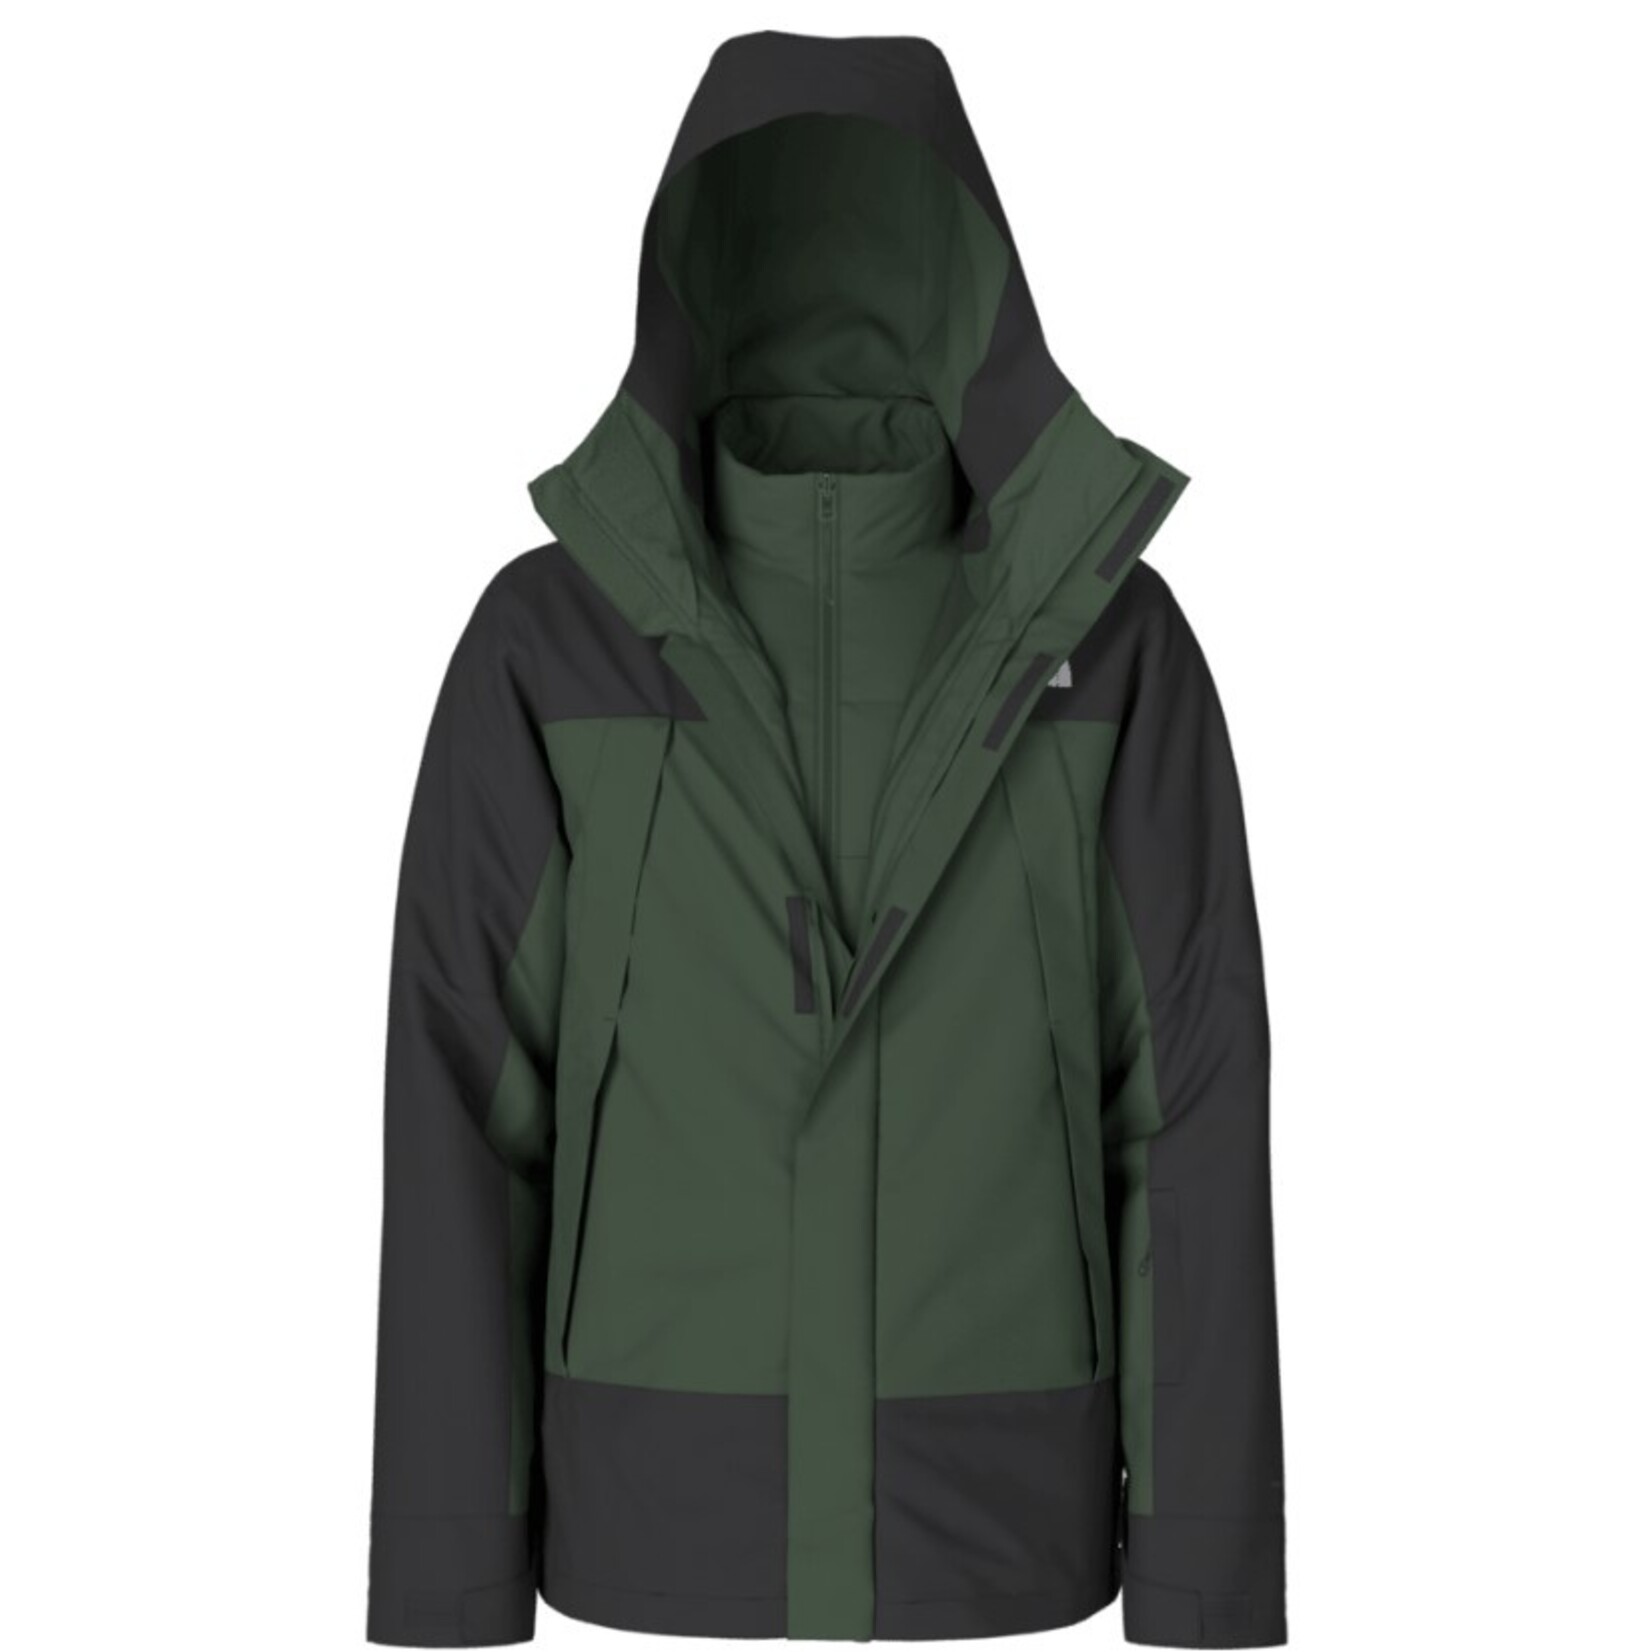 THE NORTH FACE Men's Clement Triclimate® Jacket